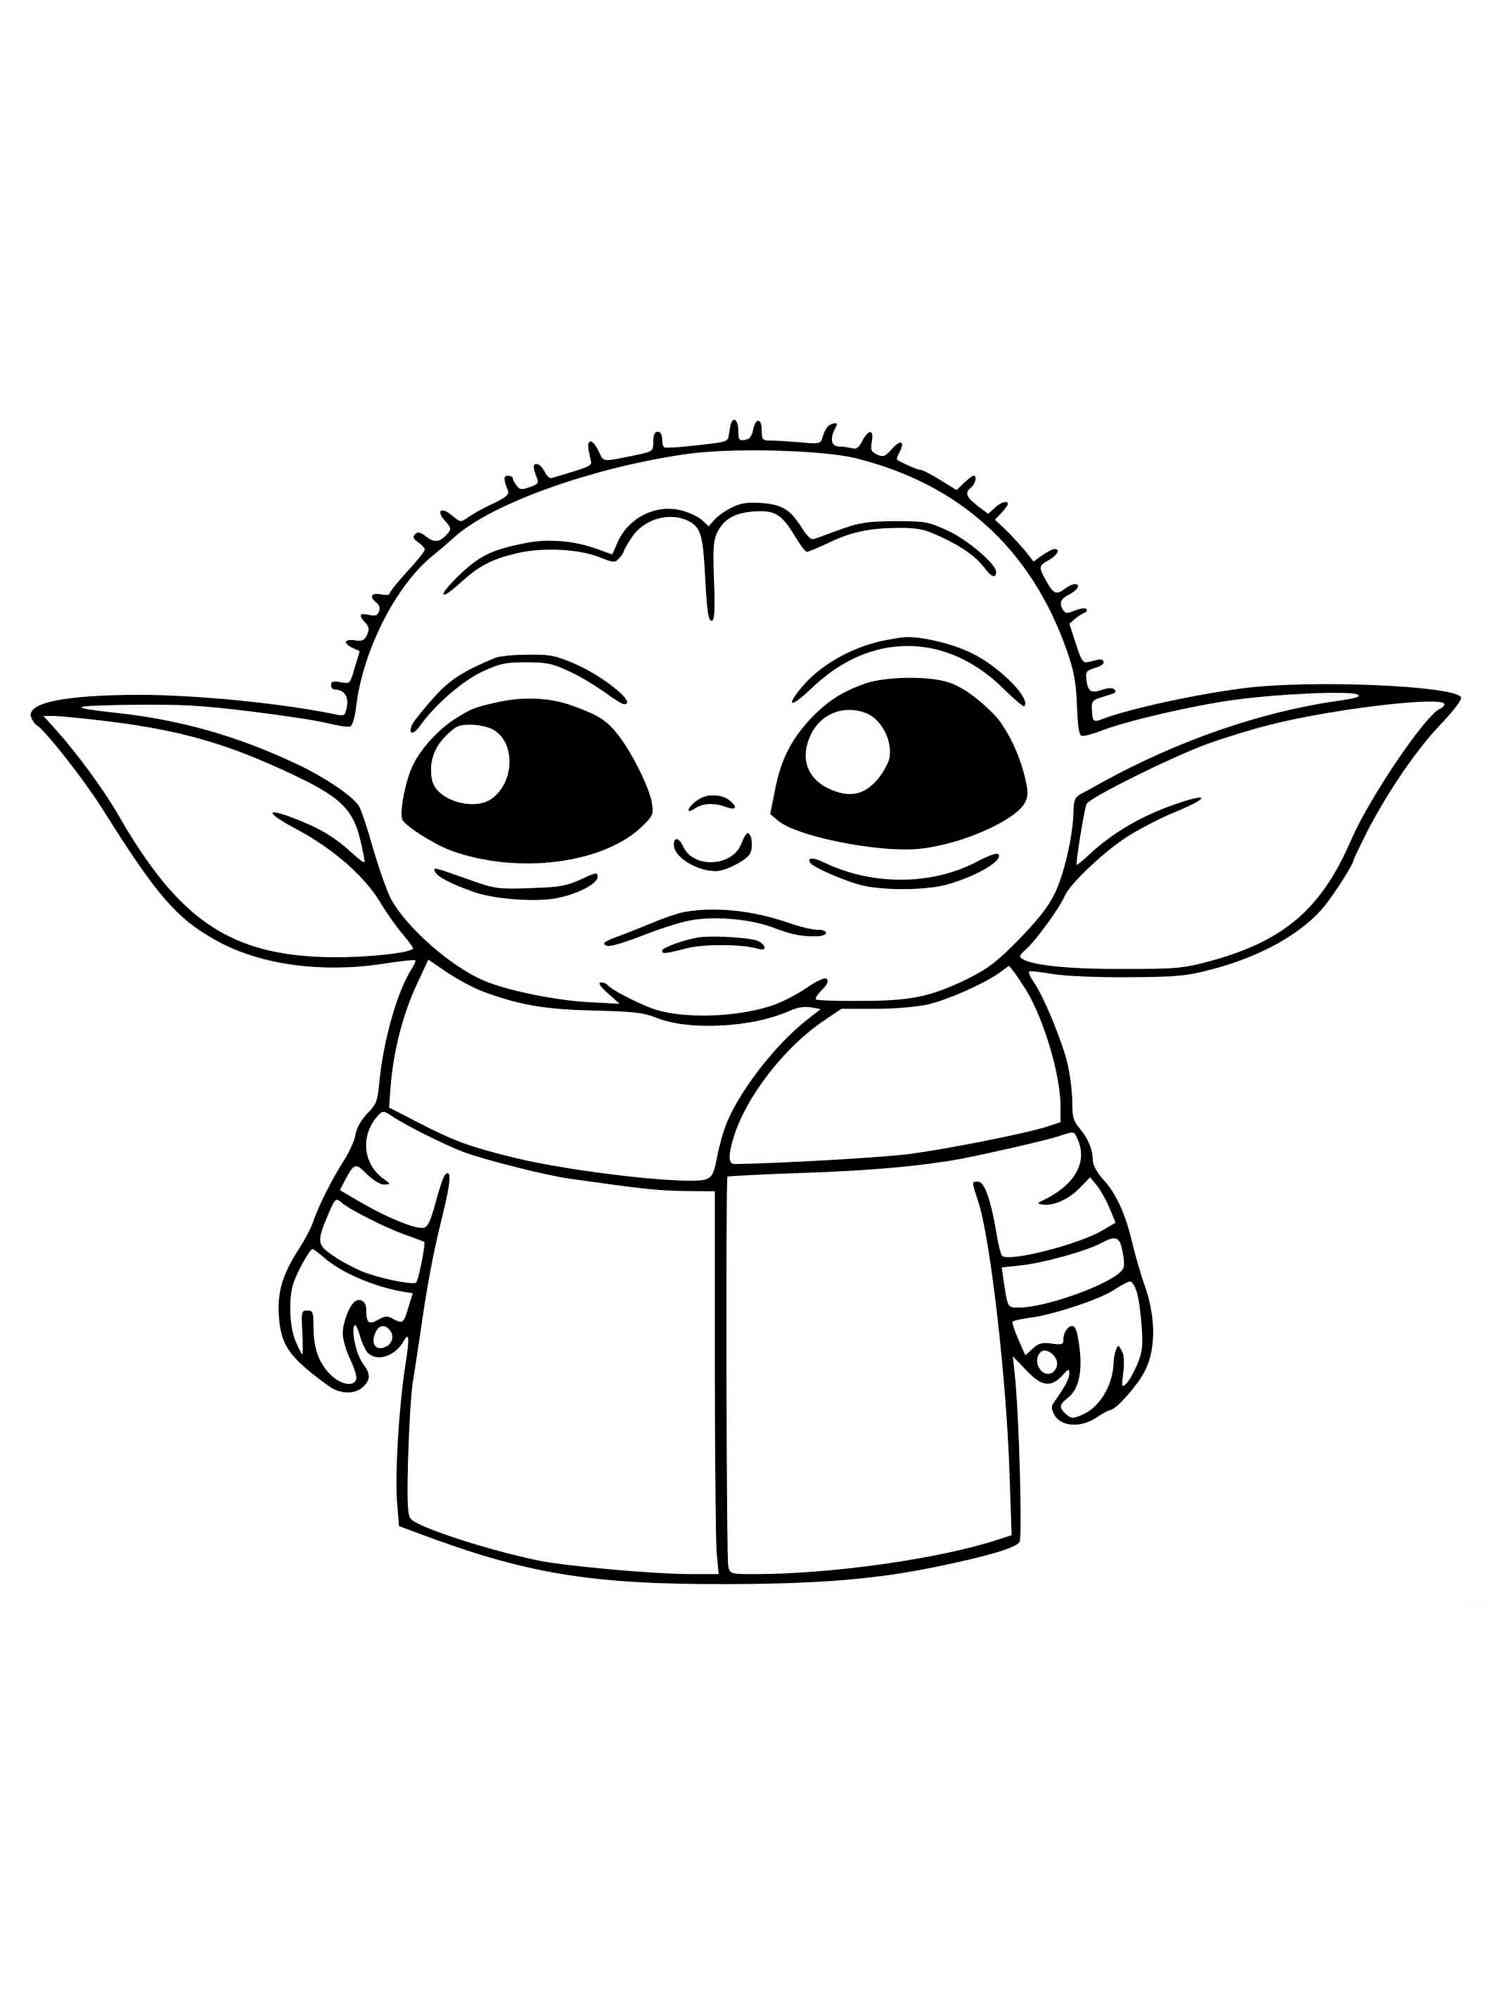 Baby Yoda coloring pages